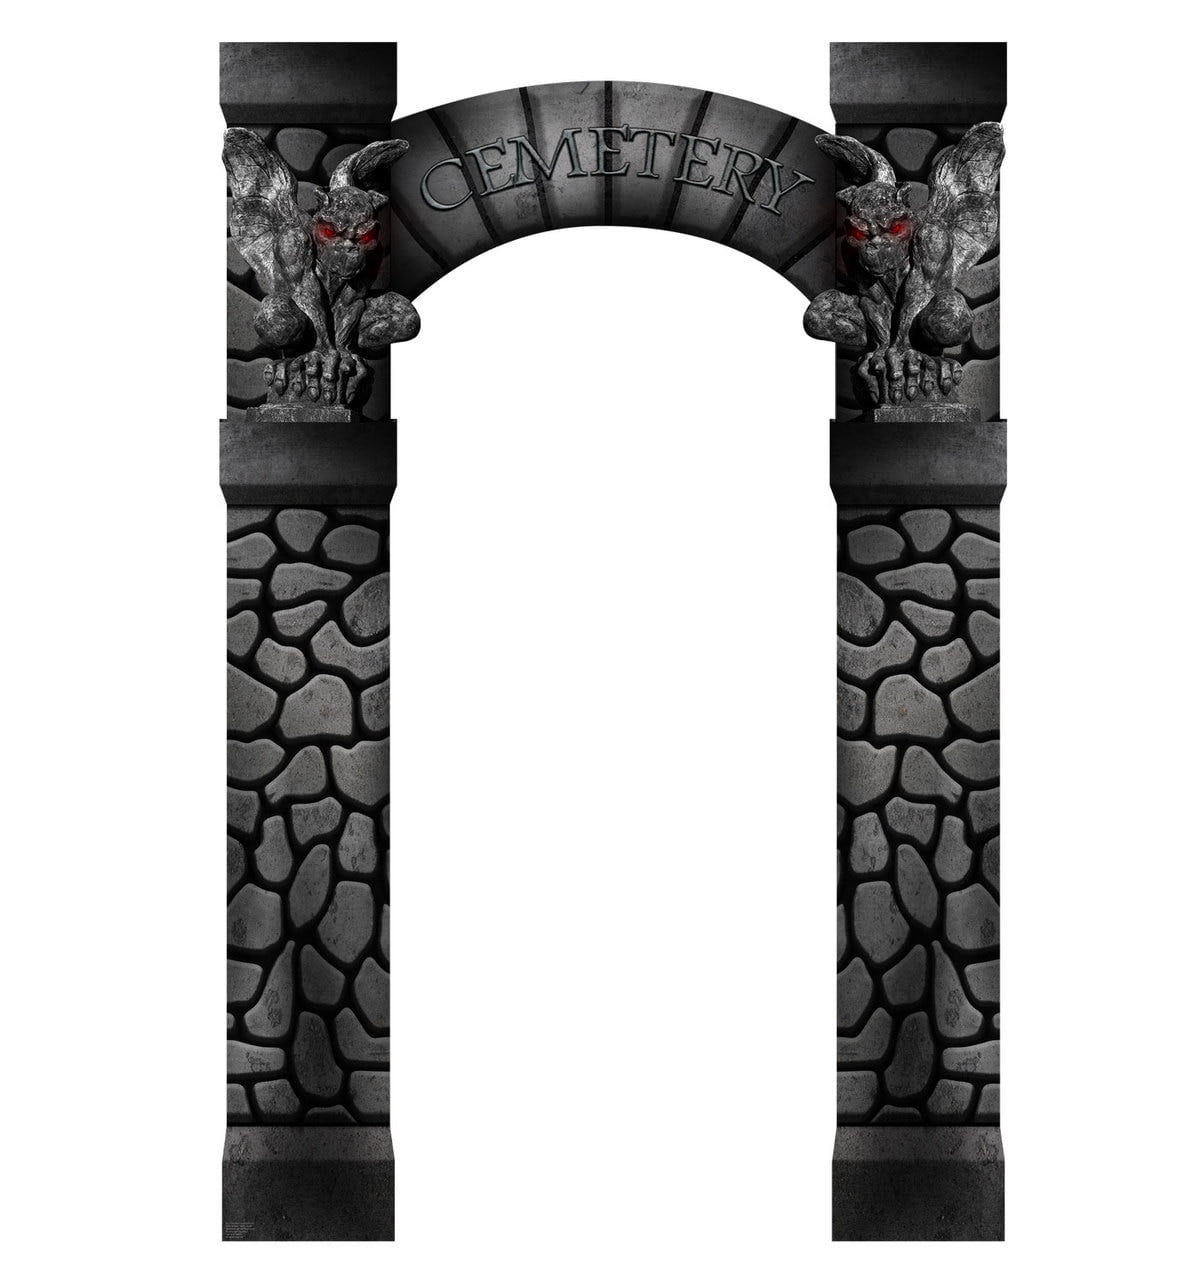 2521 86 X 56 In. Cemetery Arch Entrance Wall Decal